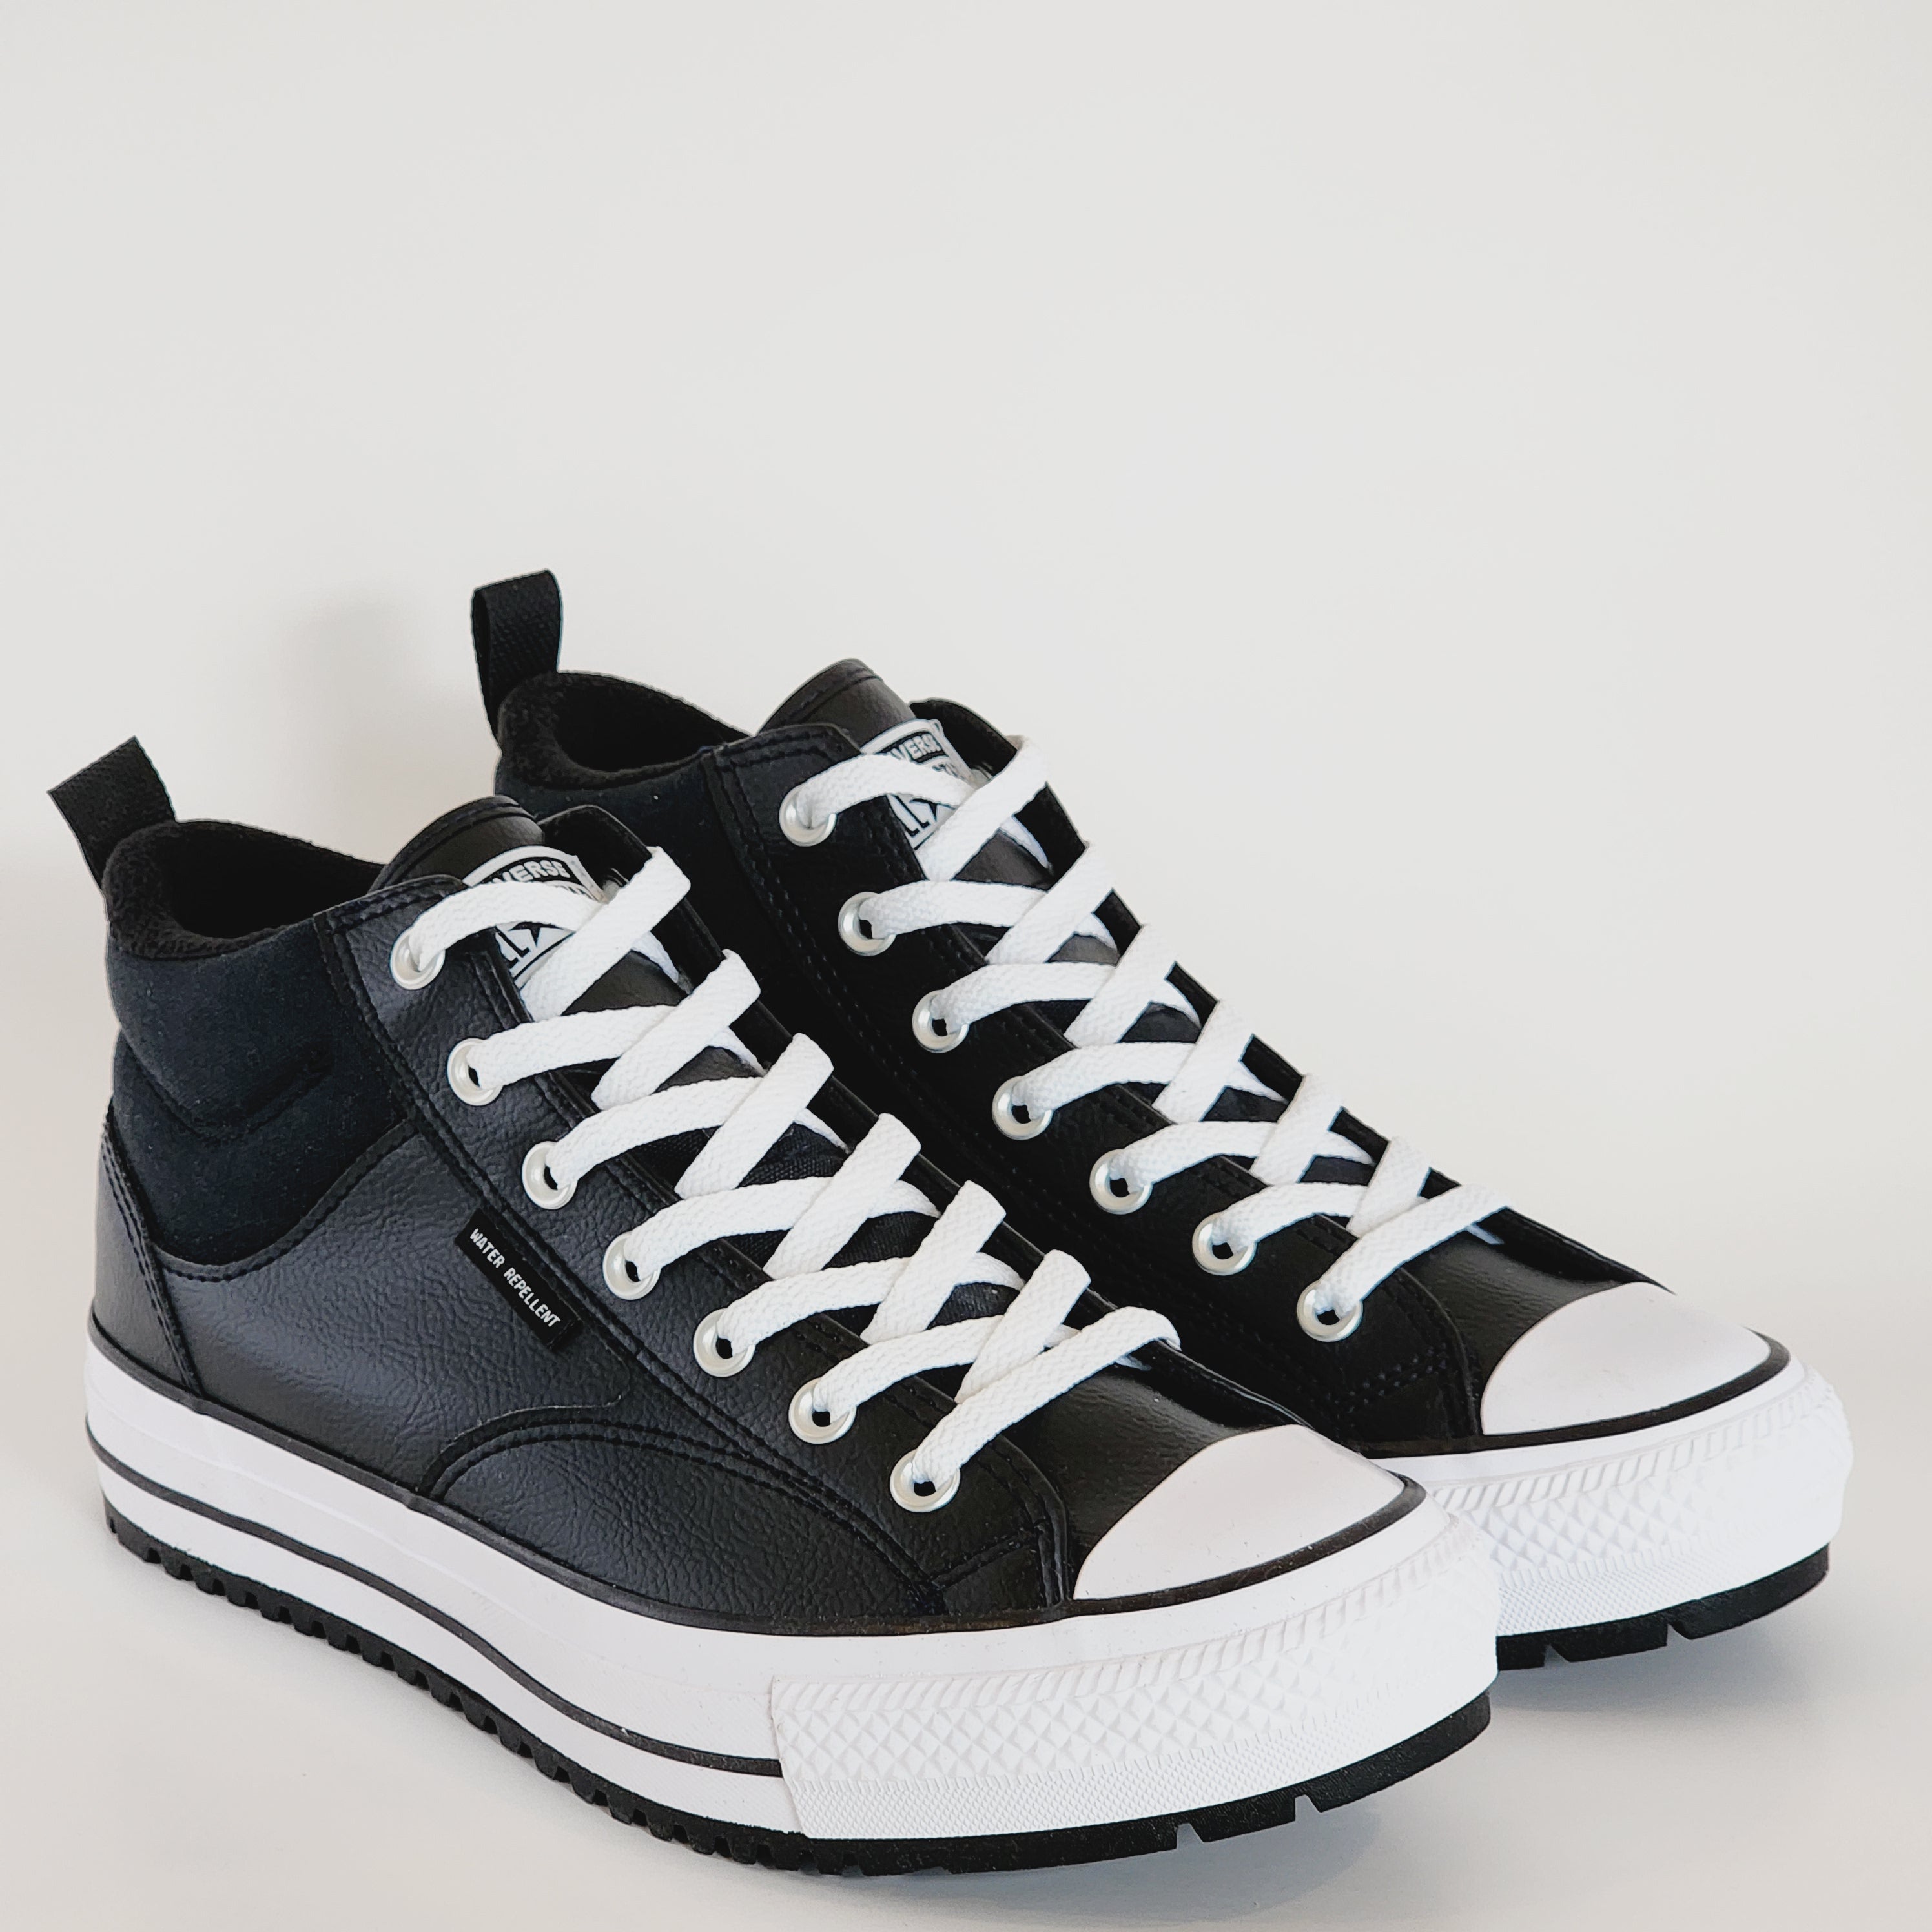 Converse CTAS Mid Malden Street Crafted Leather Unisex Sneakers A04477C NWT